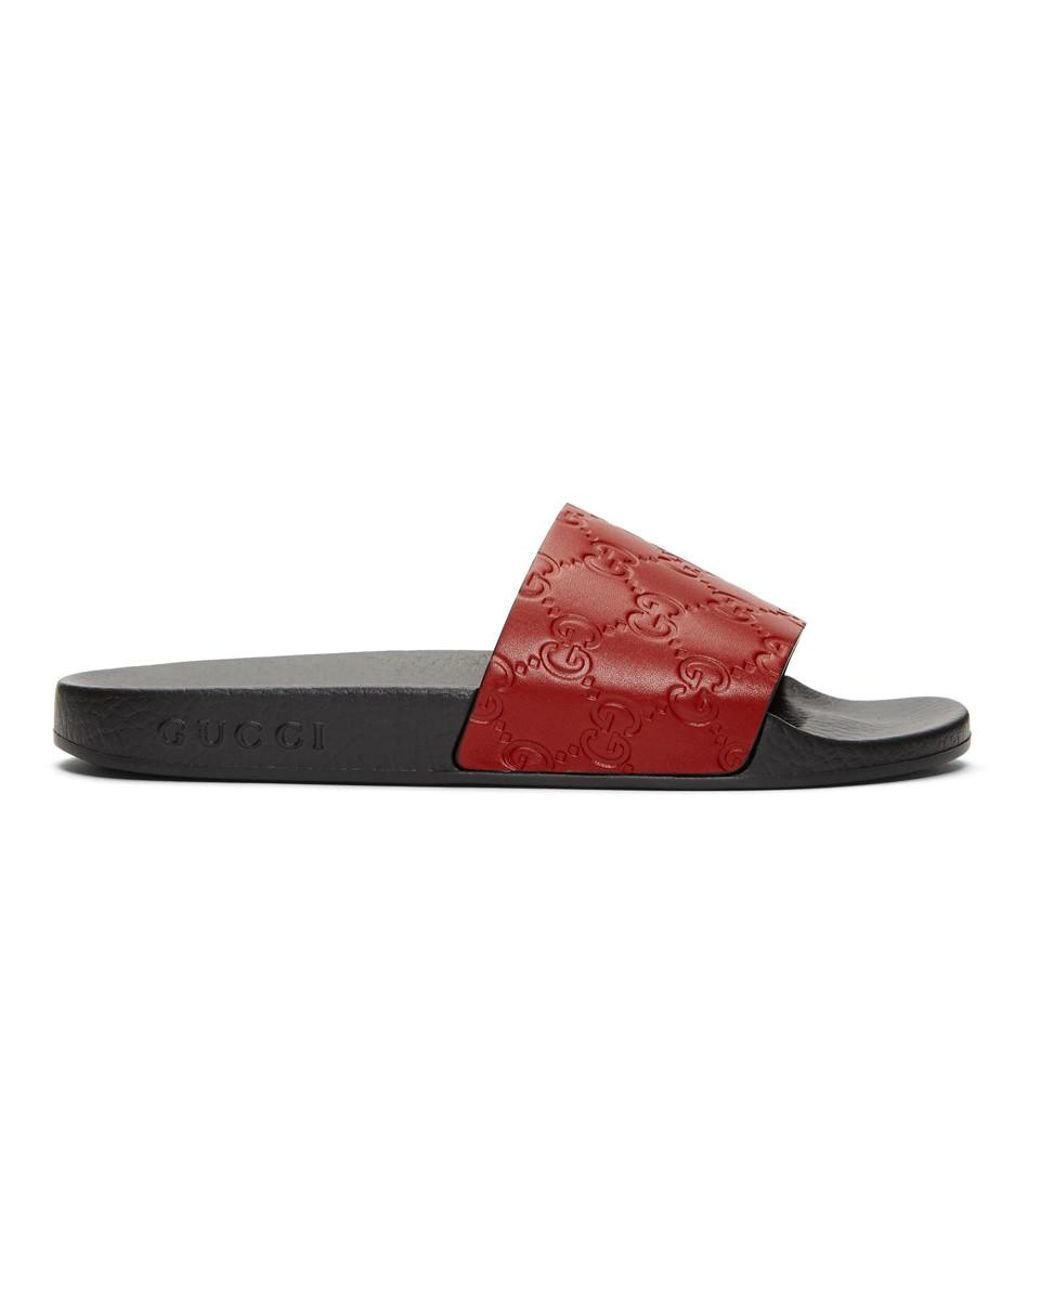 Gucci Red GG Supreme Pool Slides | Lyst